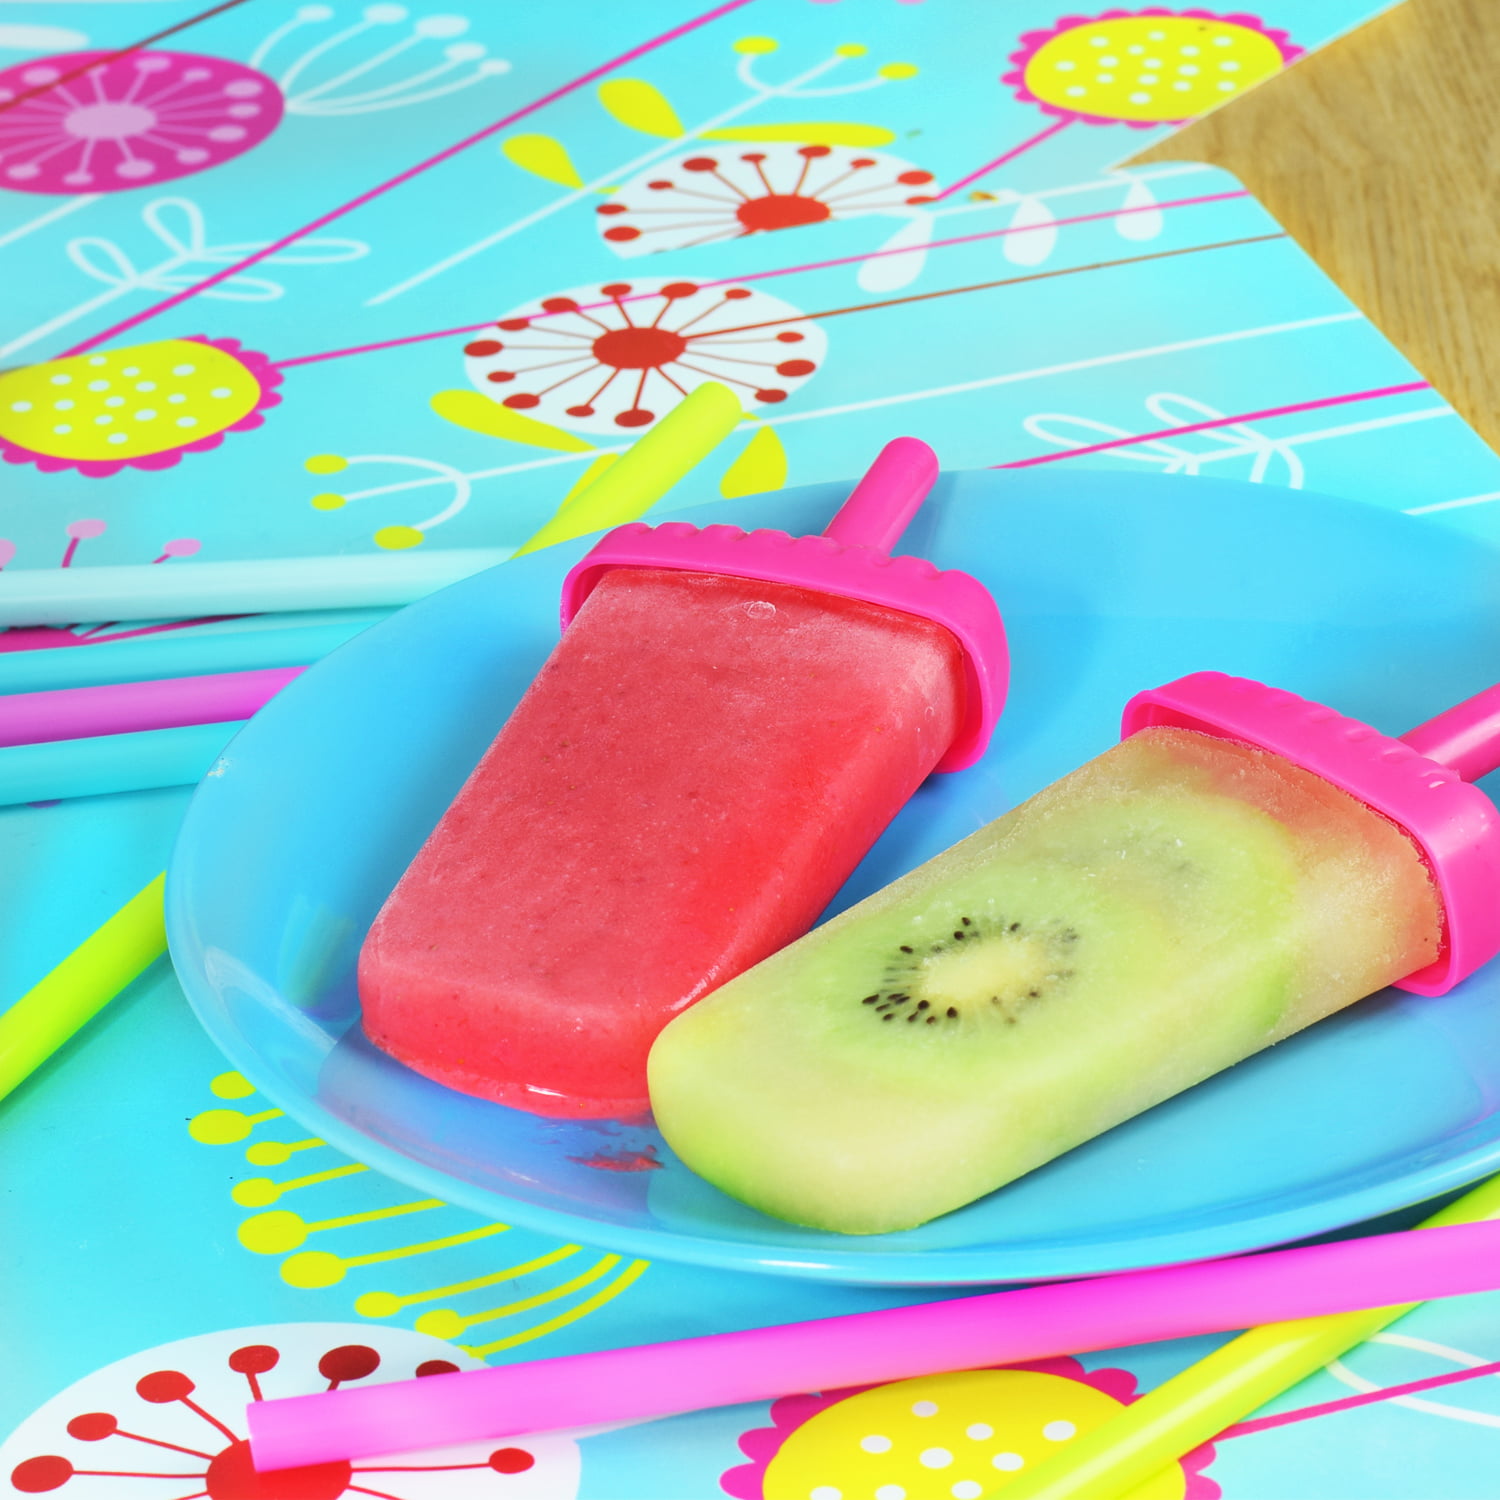 Yirtree Silicone Popsicle Molds Maker,Large Homemade ICE Pop Molds Food  Grade BPA Free Popsicle Mold Ice Cream Mold Food Grade Non-stick PVC Ice  Pop